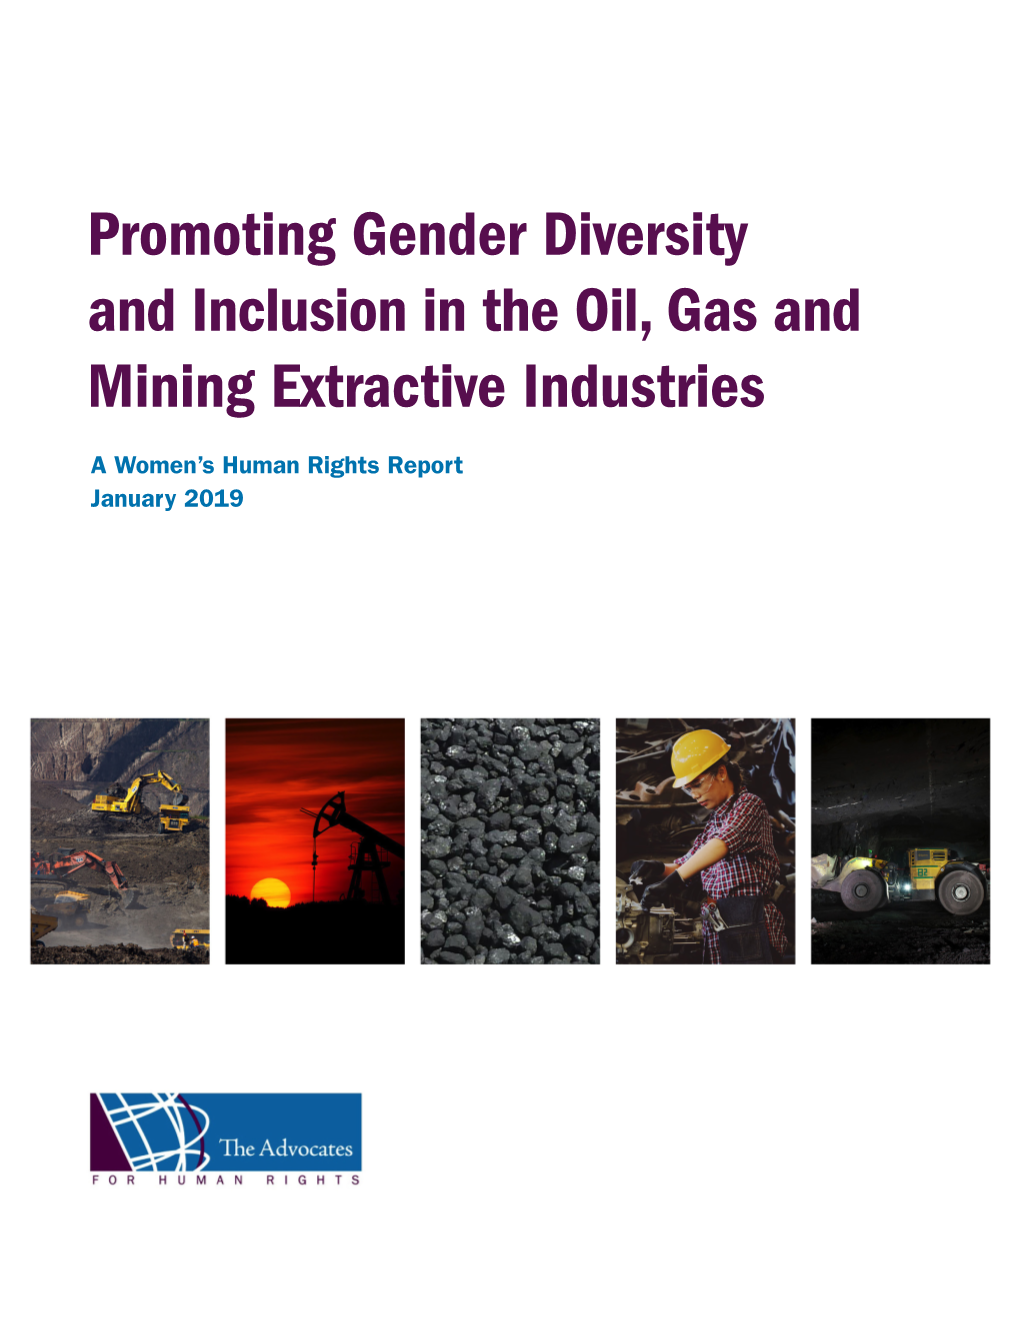 Promoting Gender Diversity and Inclusion in the Oil, Gas and Mining Extractive Industries